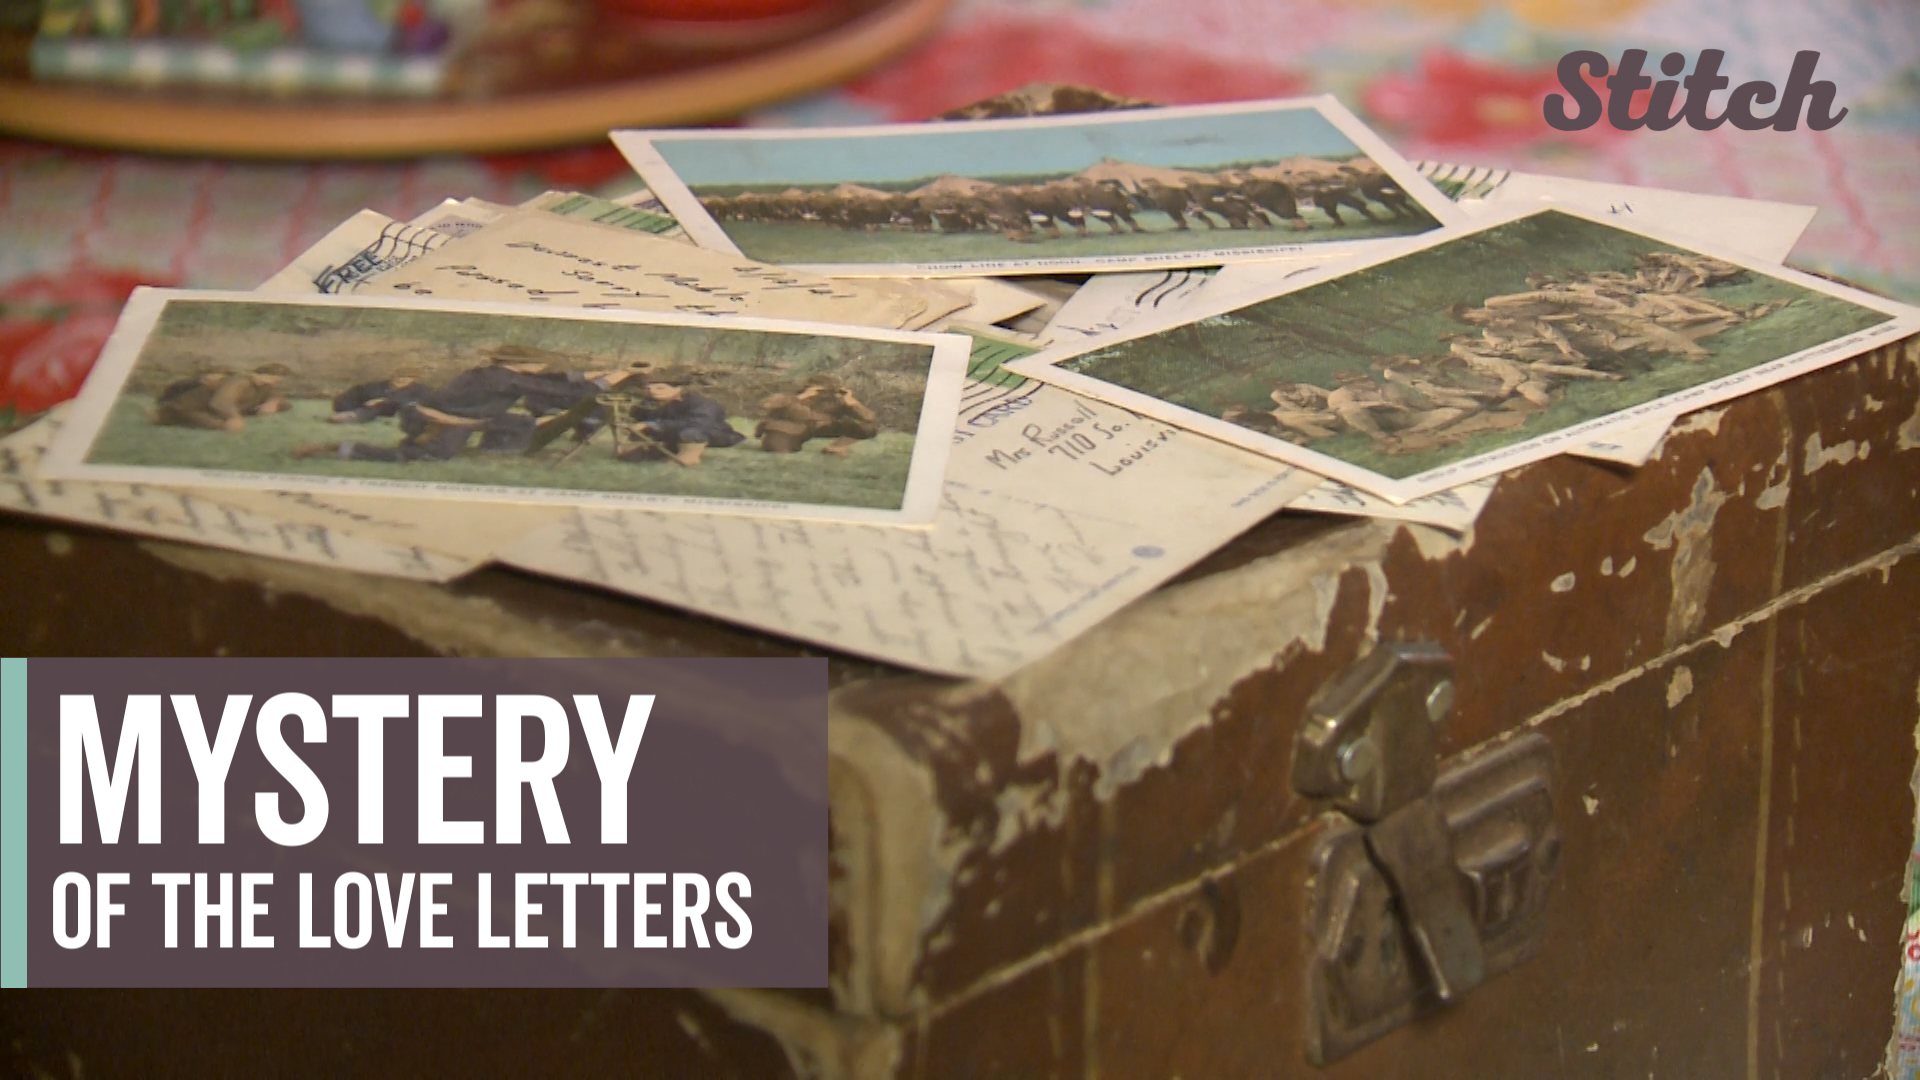 Woman searches for World War II couple after finding long lost love letters